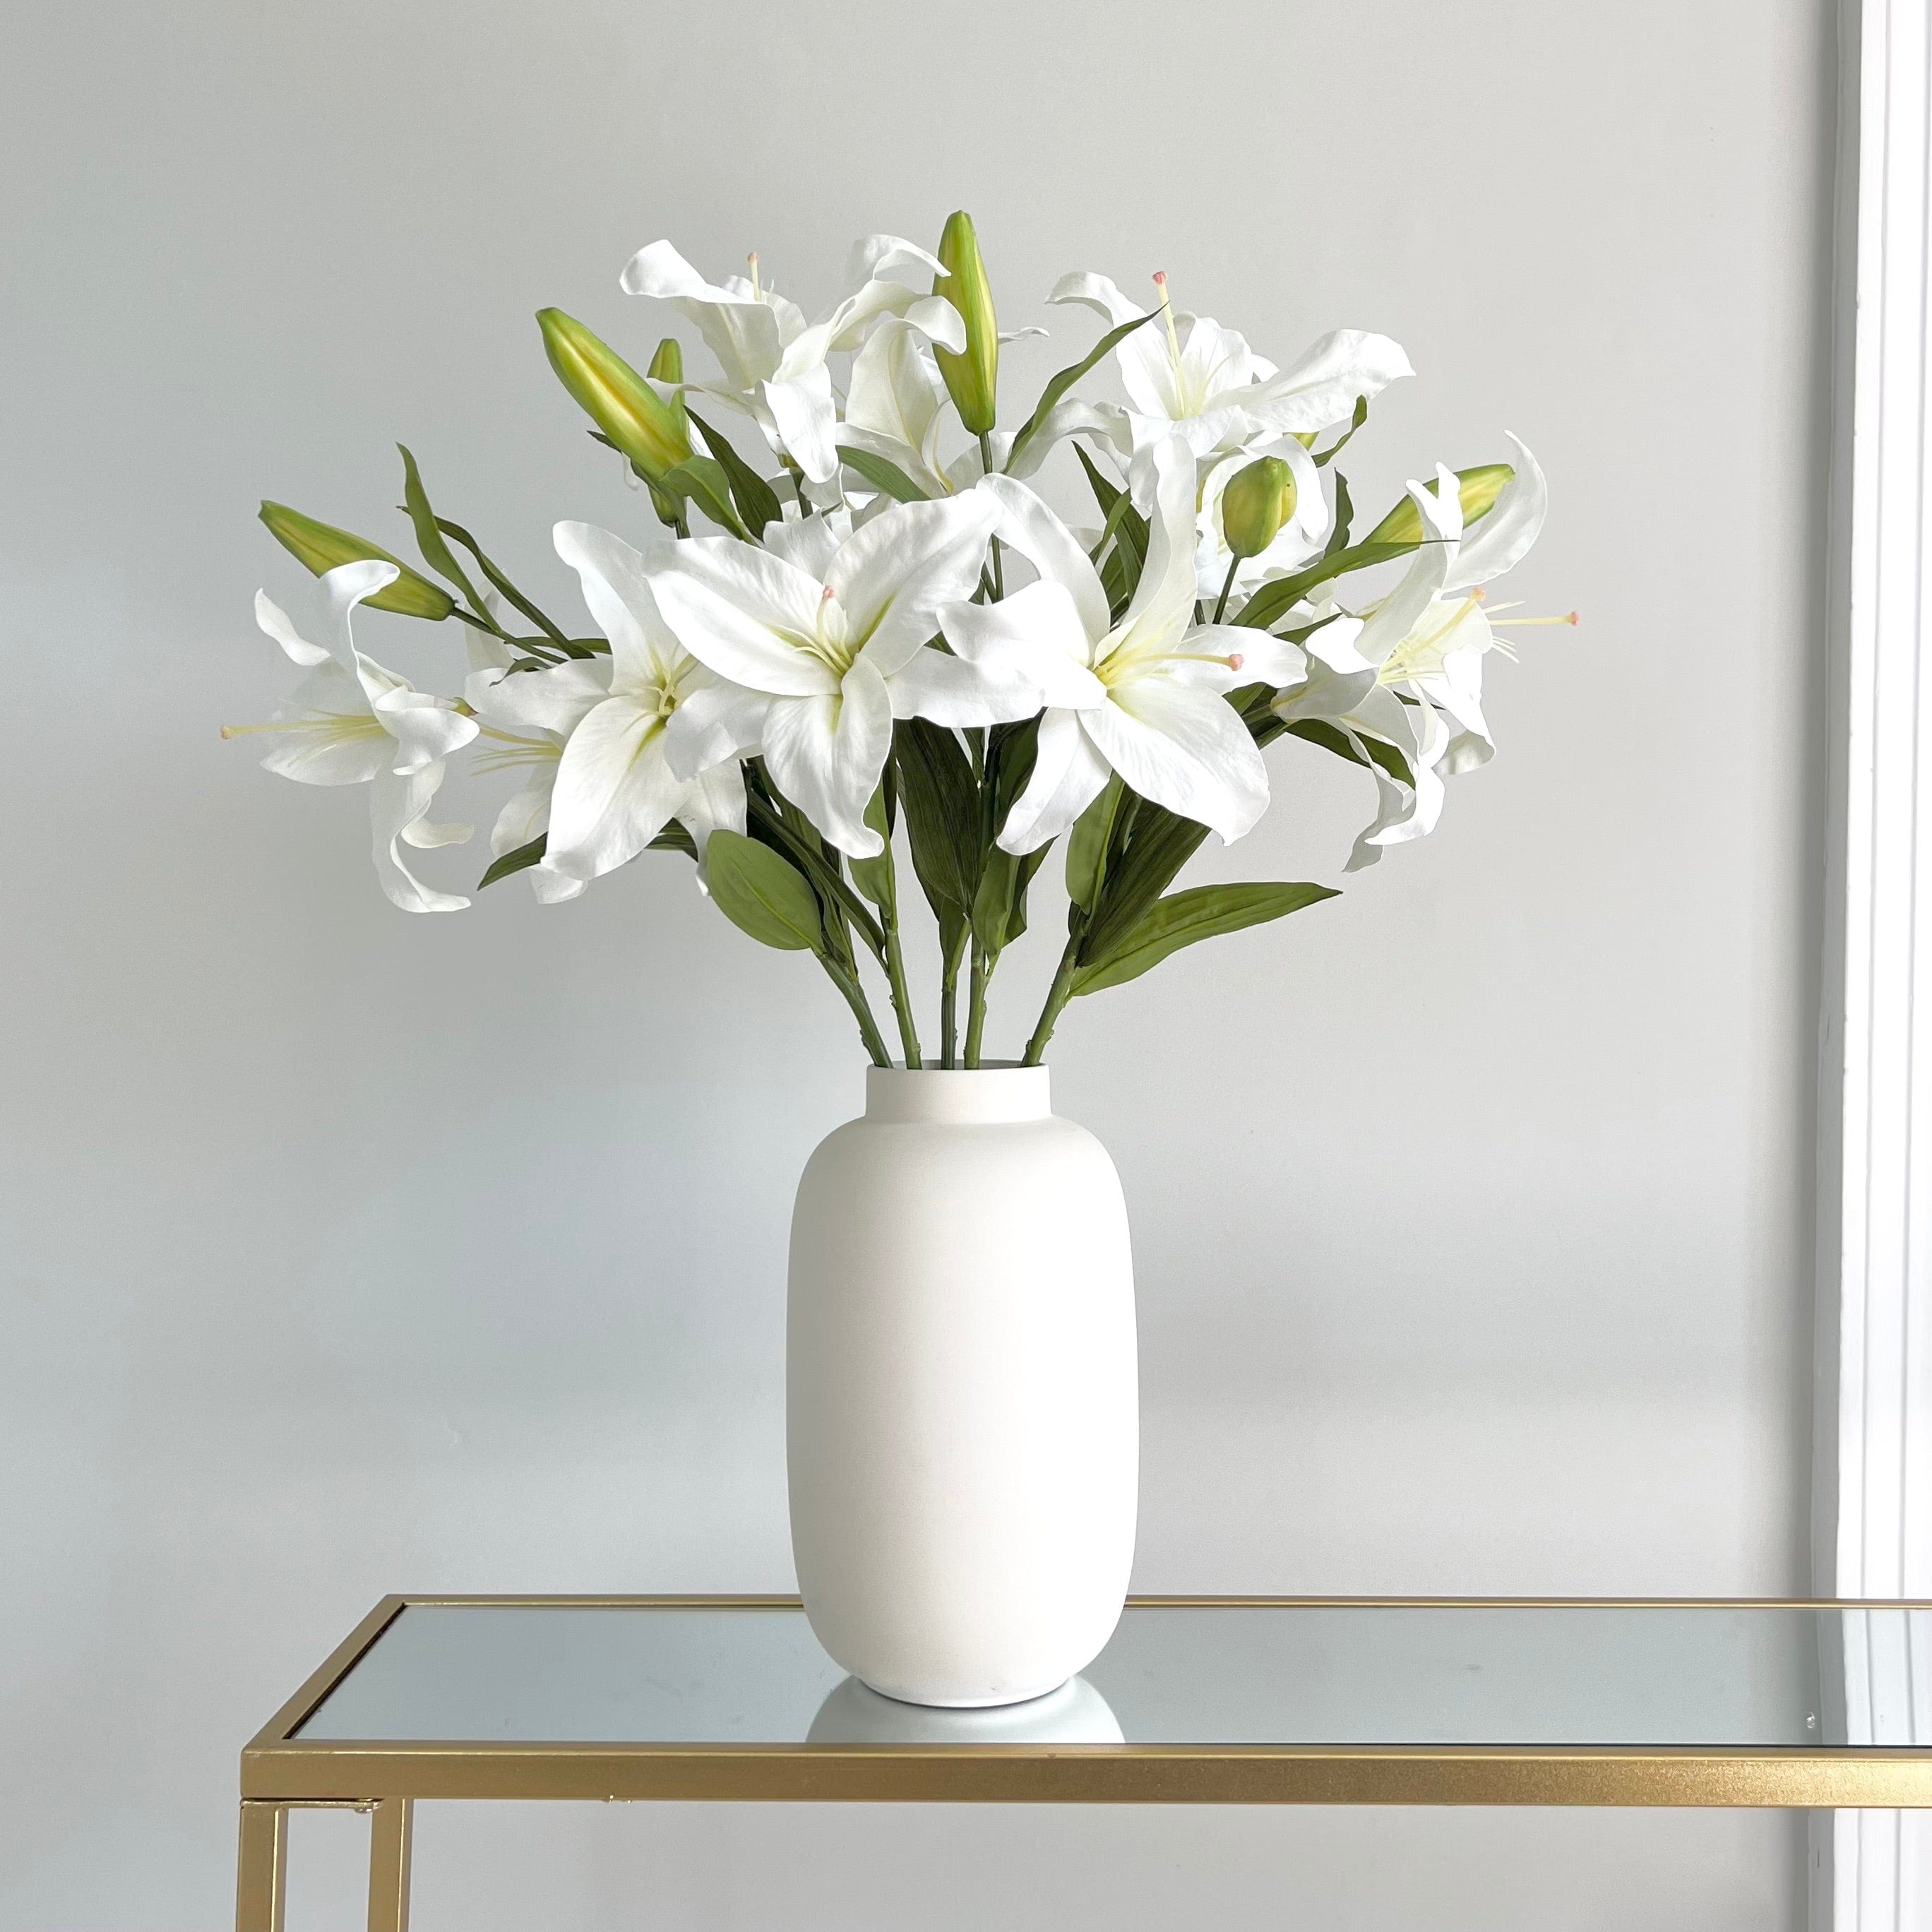 Artificial flowers luxury faux silk white casablanca lily kingham vase lifelike realistic faux flowers ABP04B3 ABY3018WH